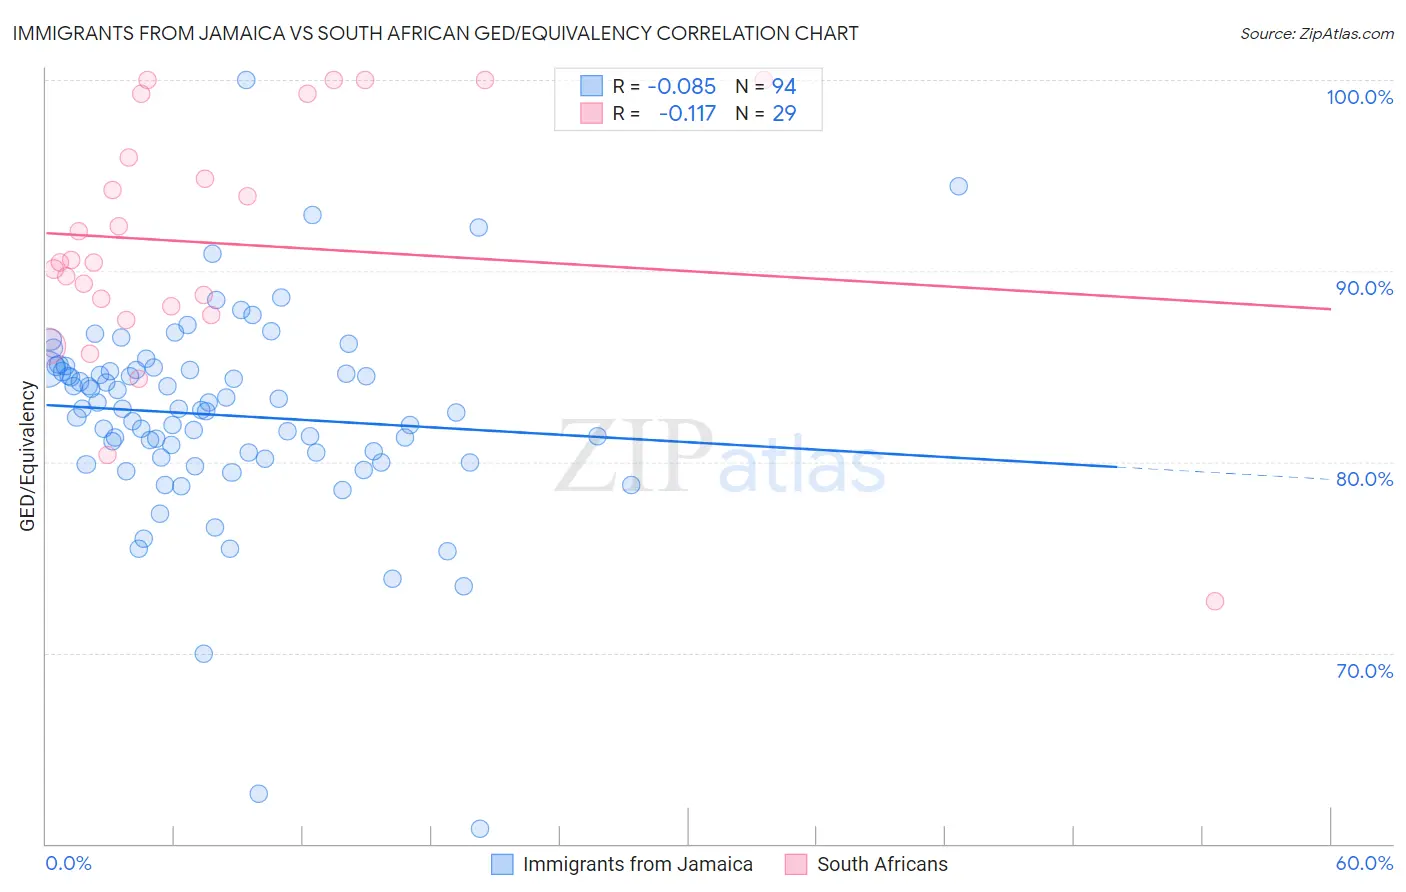 Immigrants from Jamaica vs South African GED/Equivalency